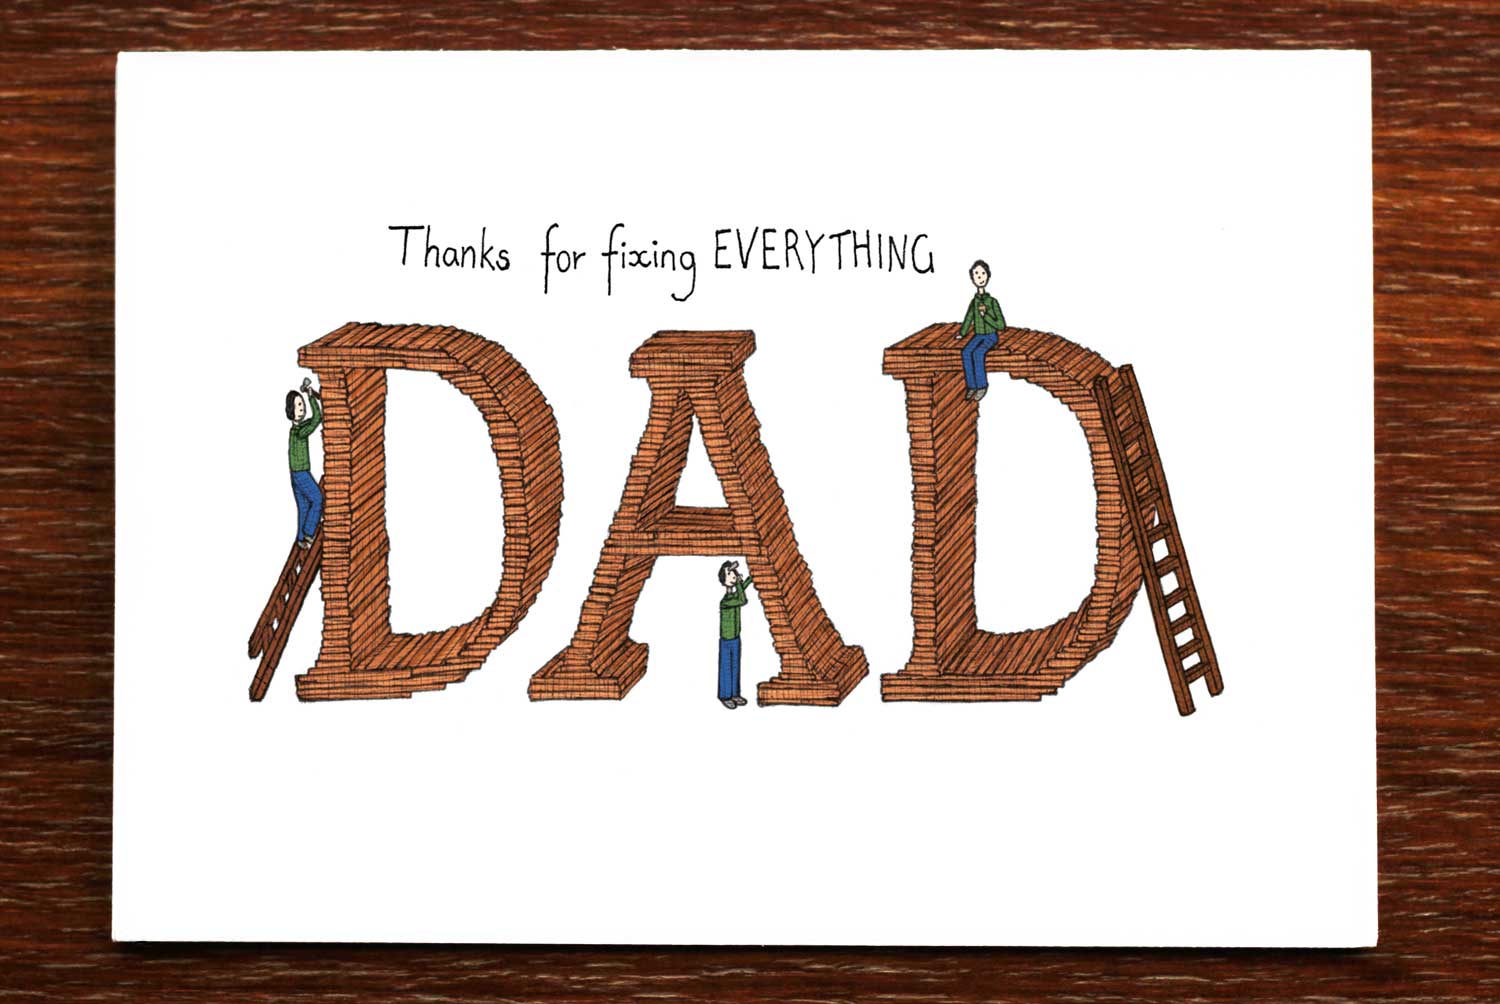 Father's Day card that reads "Thanks for fixing everything Dad"